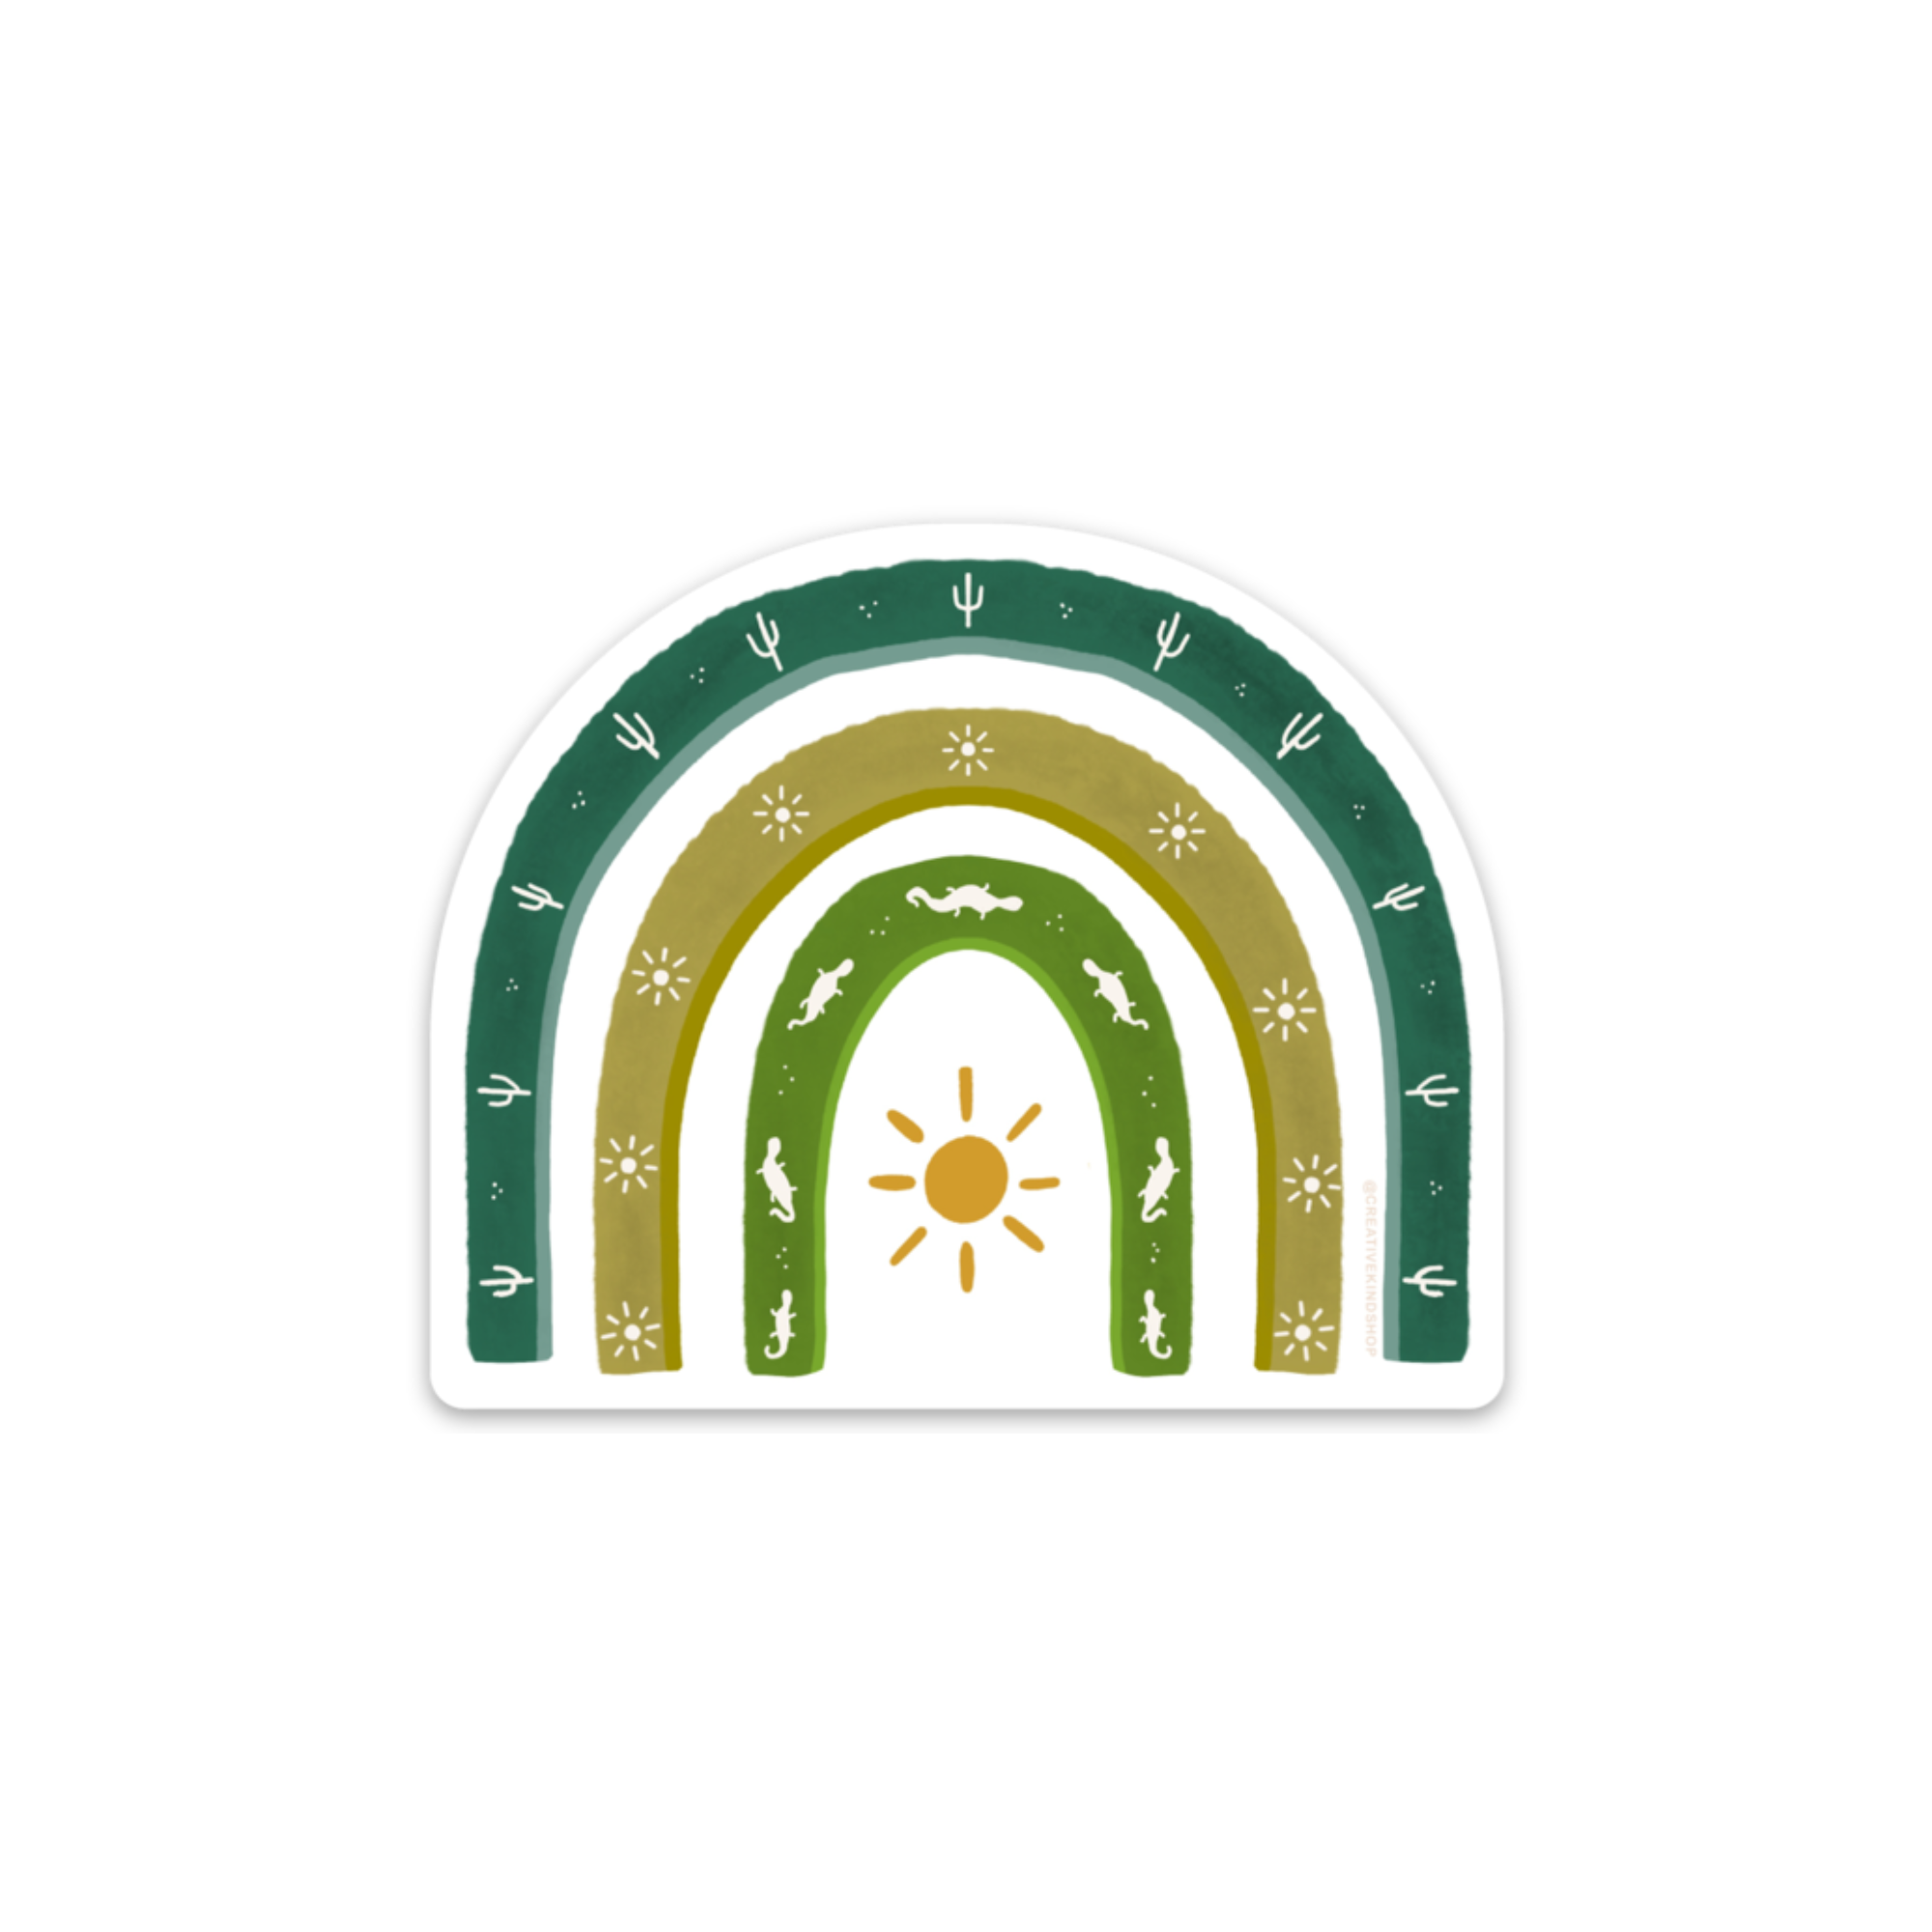 Die cut sticker of a rainbow in various shades of green with saguaros, suns, and lizards in the arches